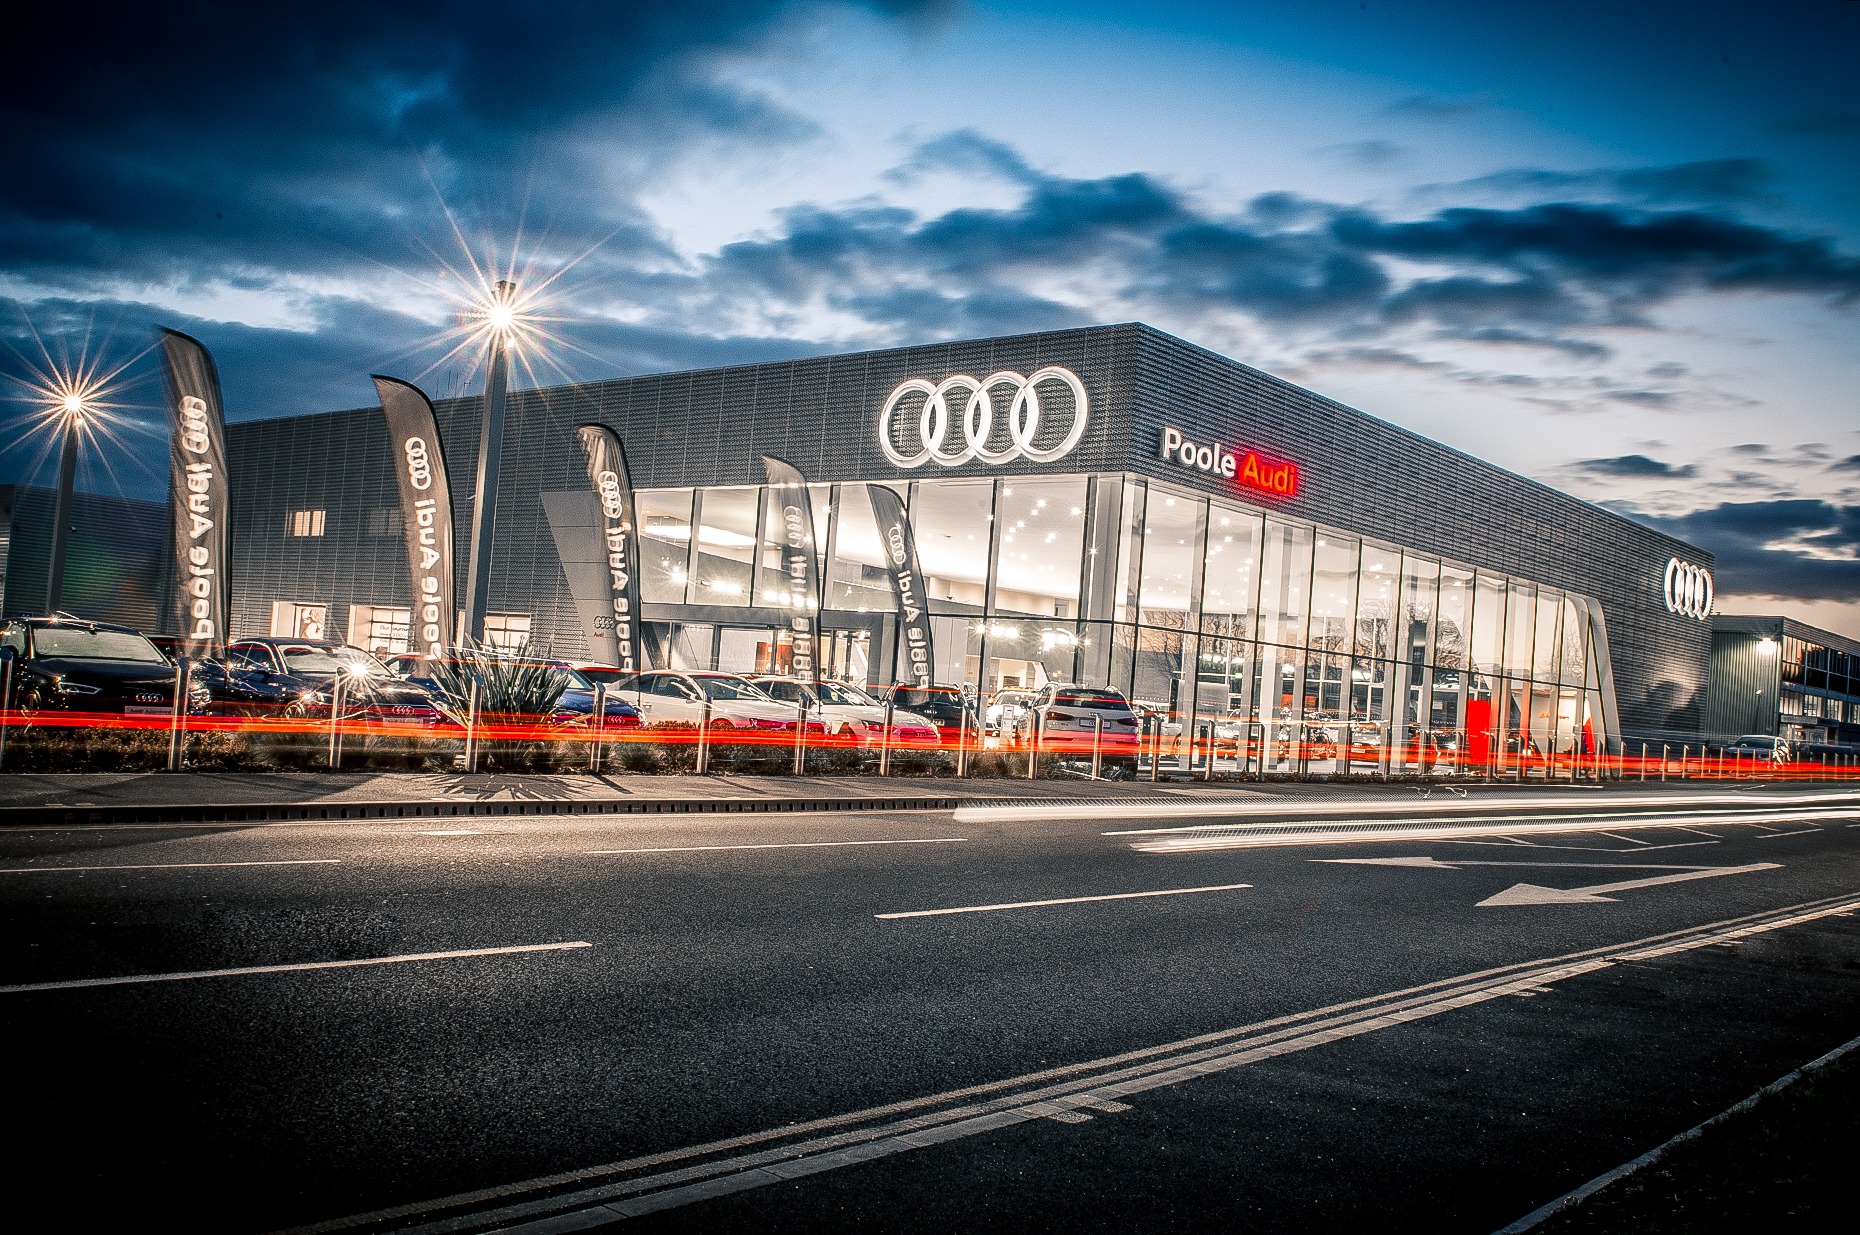 Extended lead times for new Audi orders